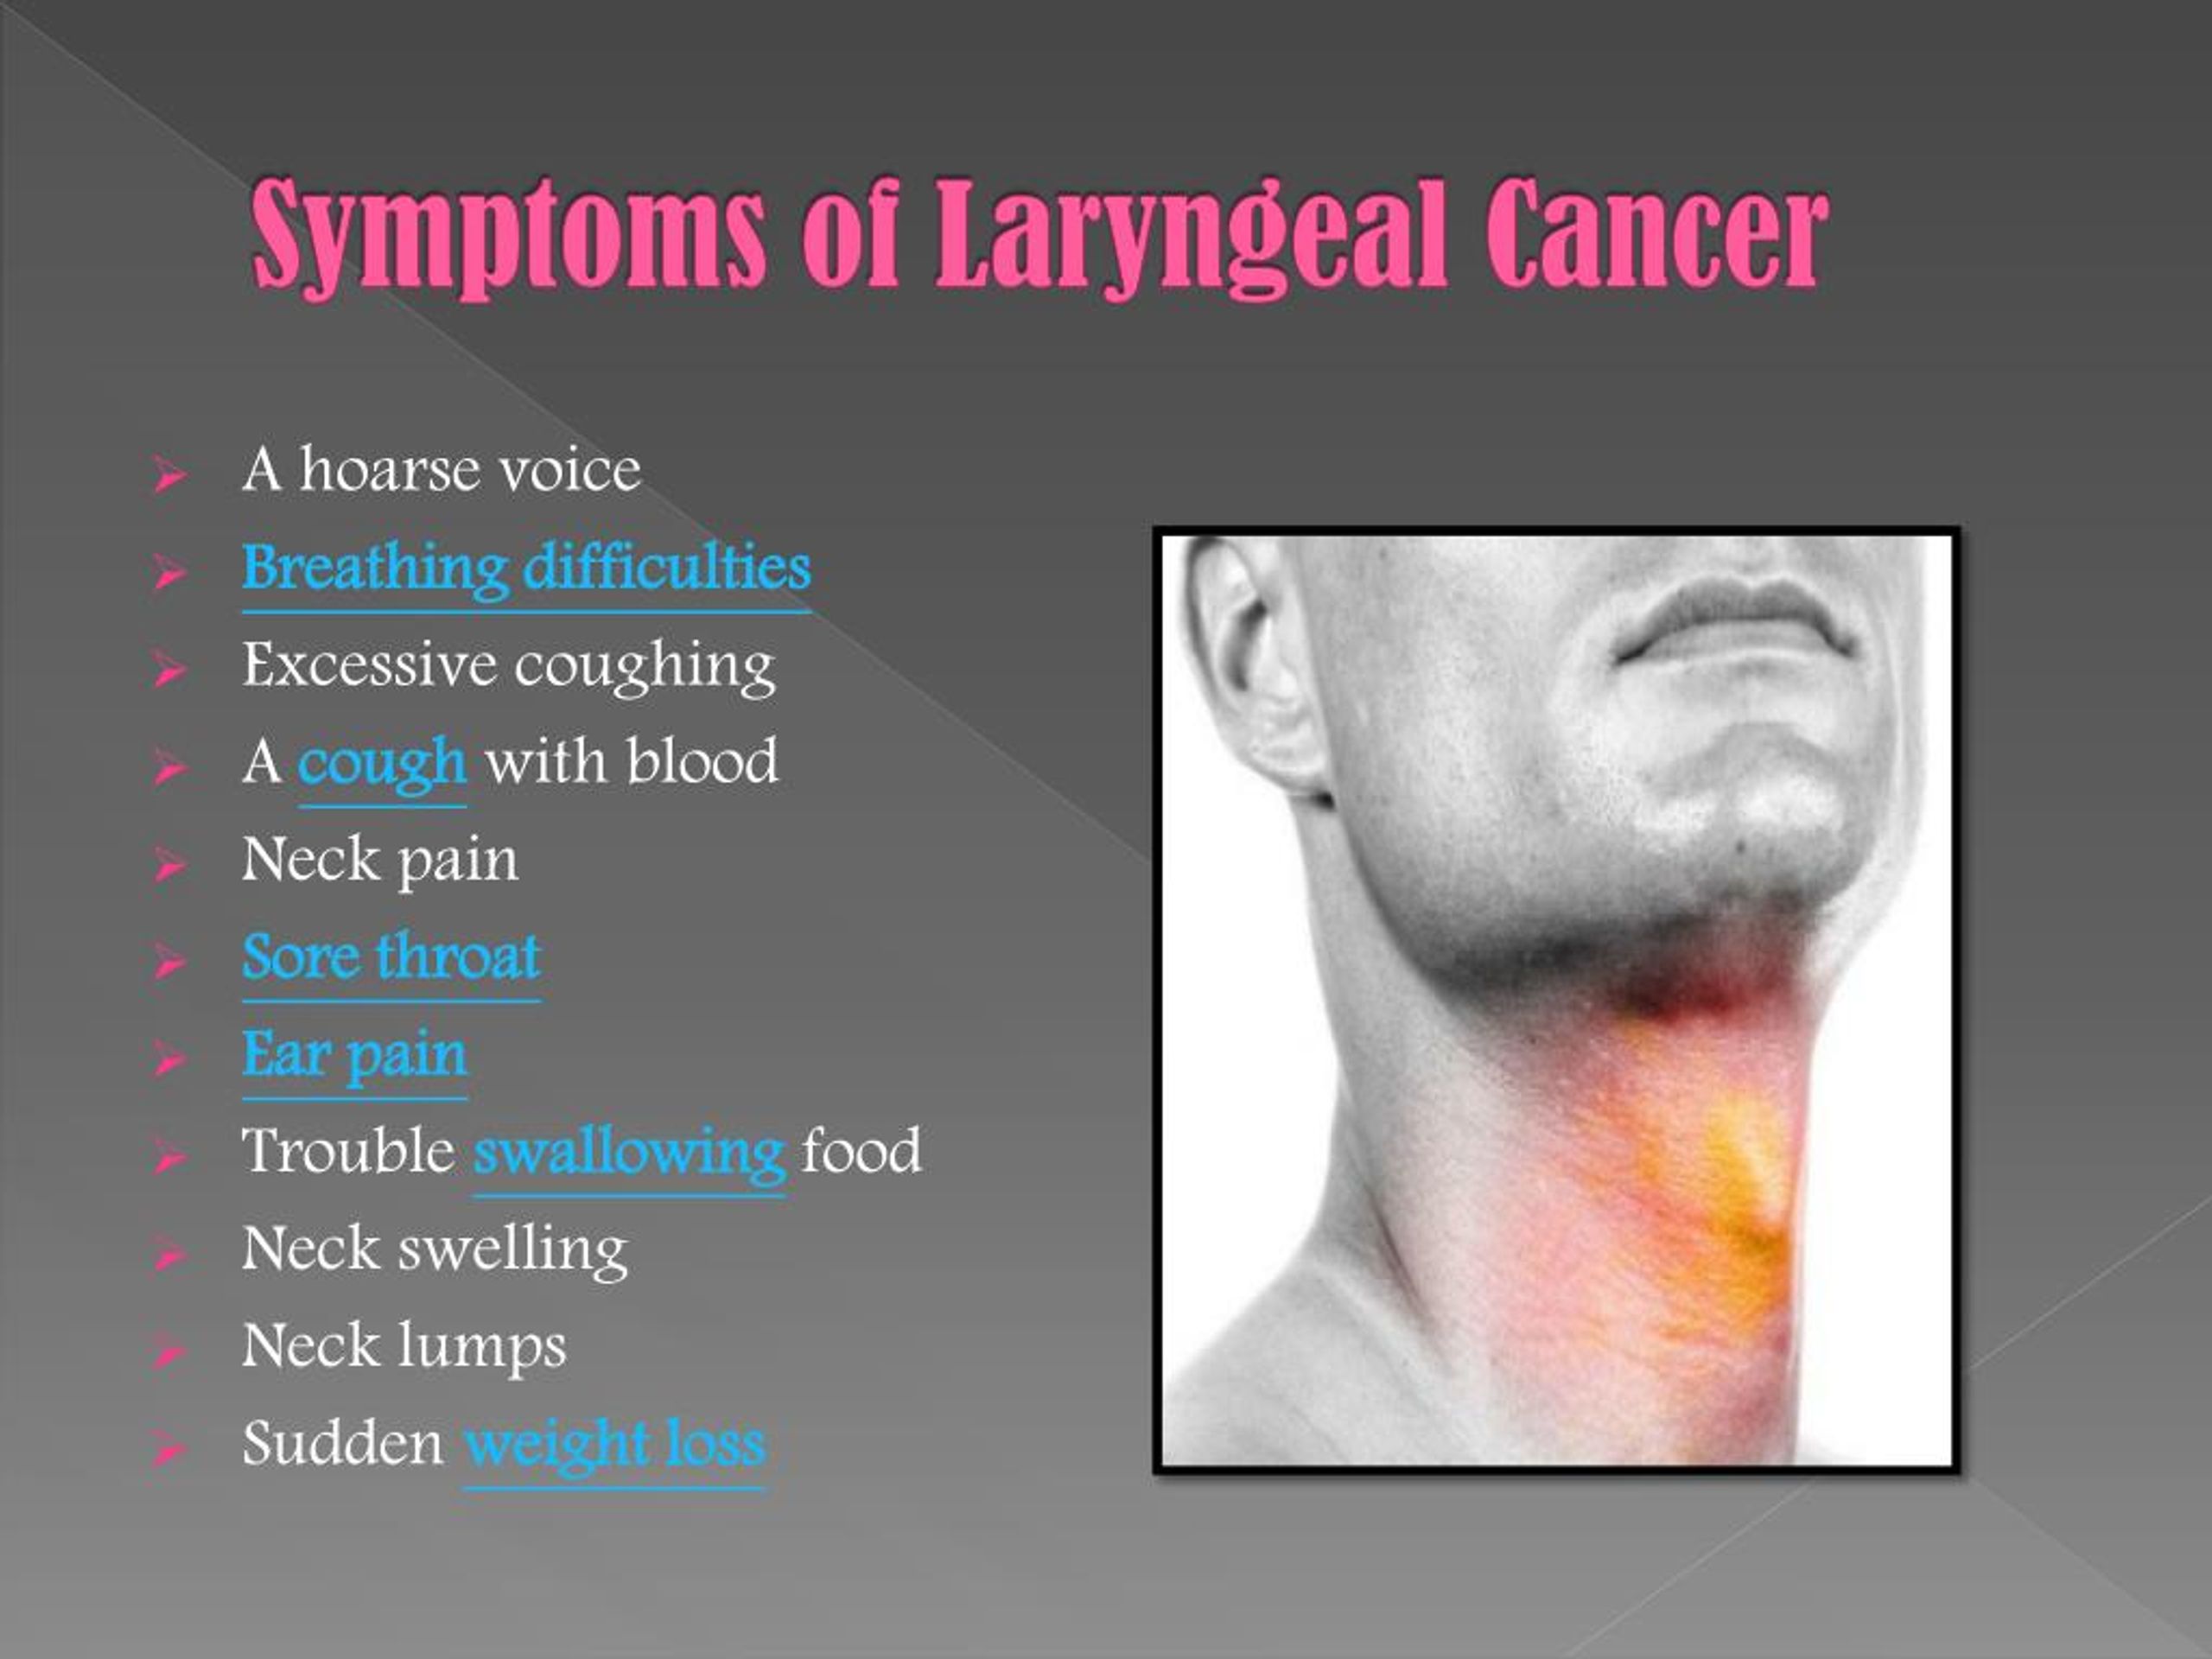 Ppt Laryngeal Cancer Symptoms Causes Diagnosis And Treatment Powerpoint Presentation Id 6377